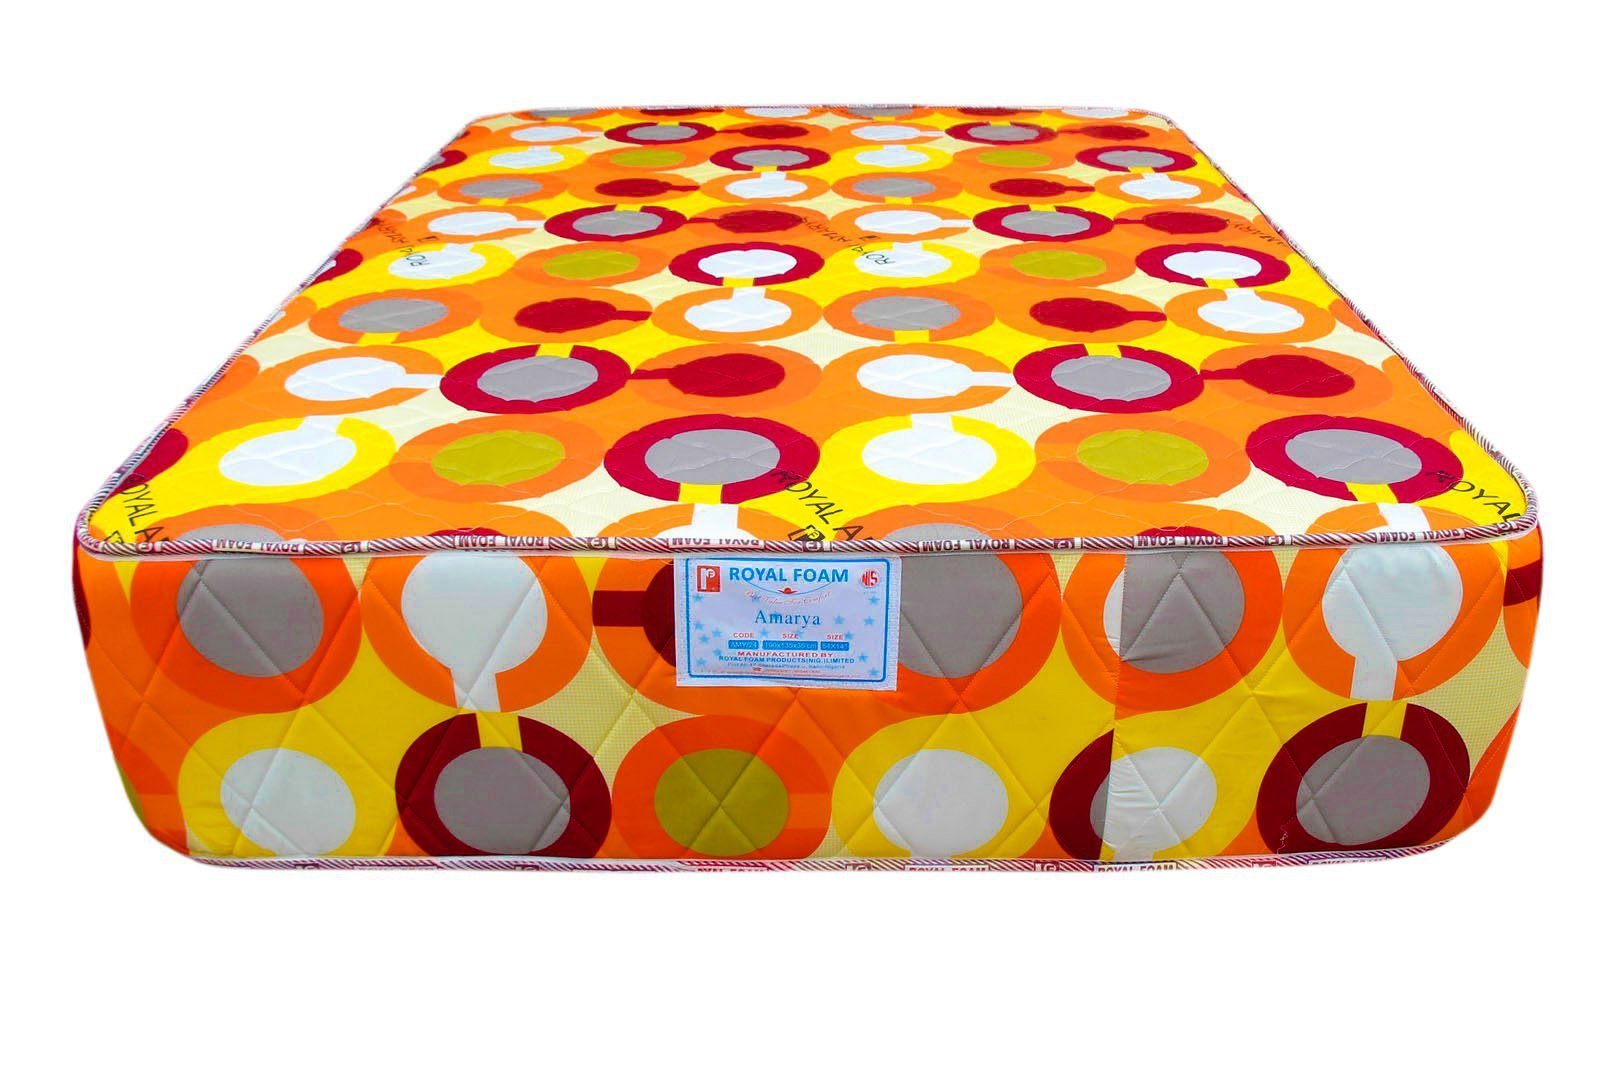 Royal Amarya-Poly Cotton Fabric - 14 Density foam - Fully Quilted Mattress -190X90X15CM [75 x 36 x 6"] [6ft x 3ft x 6inches]